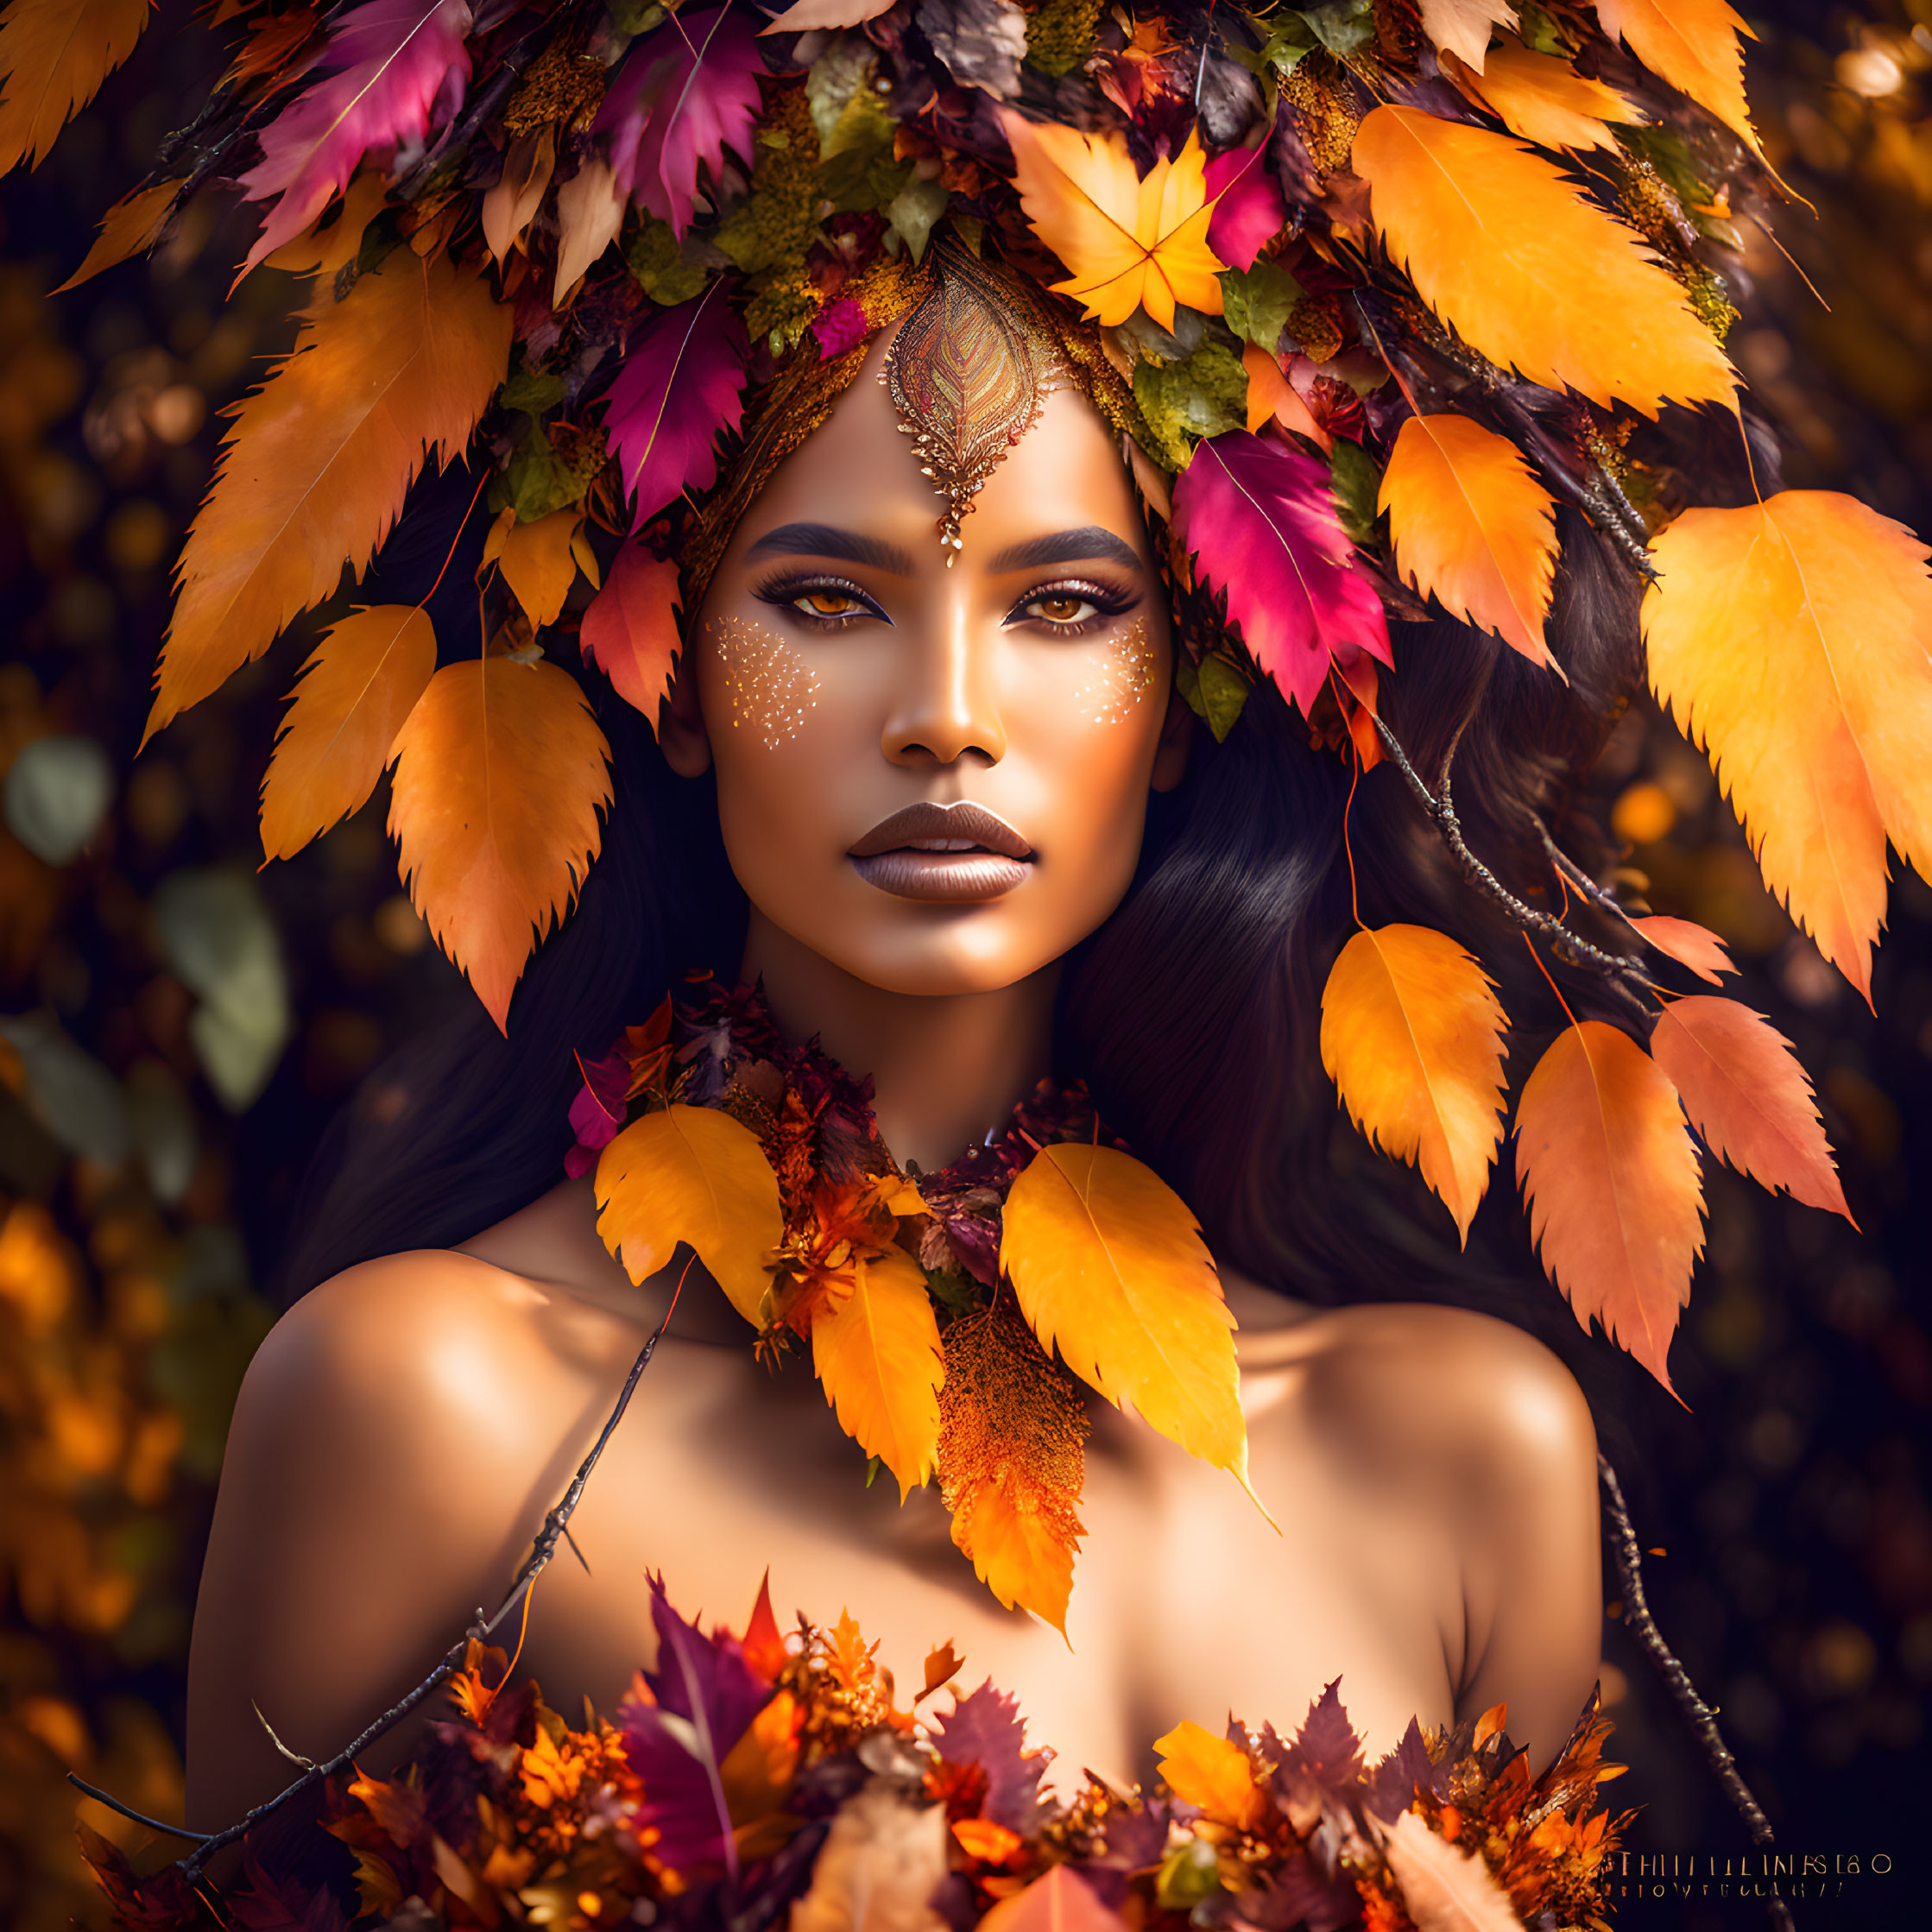 Person adorned with autumn leaves, embodying fall essence with warm colors and artistic makeup